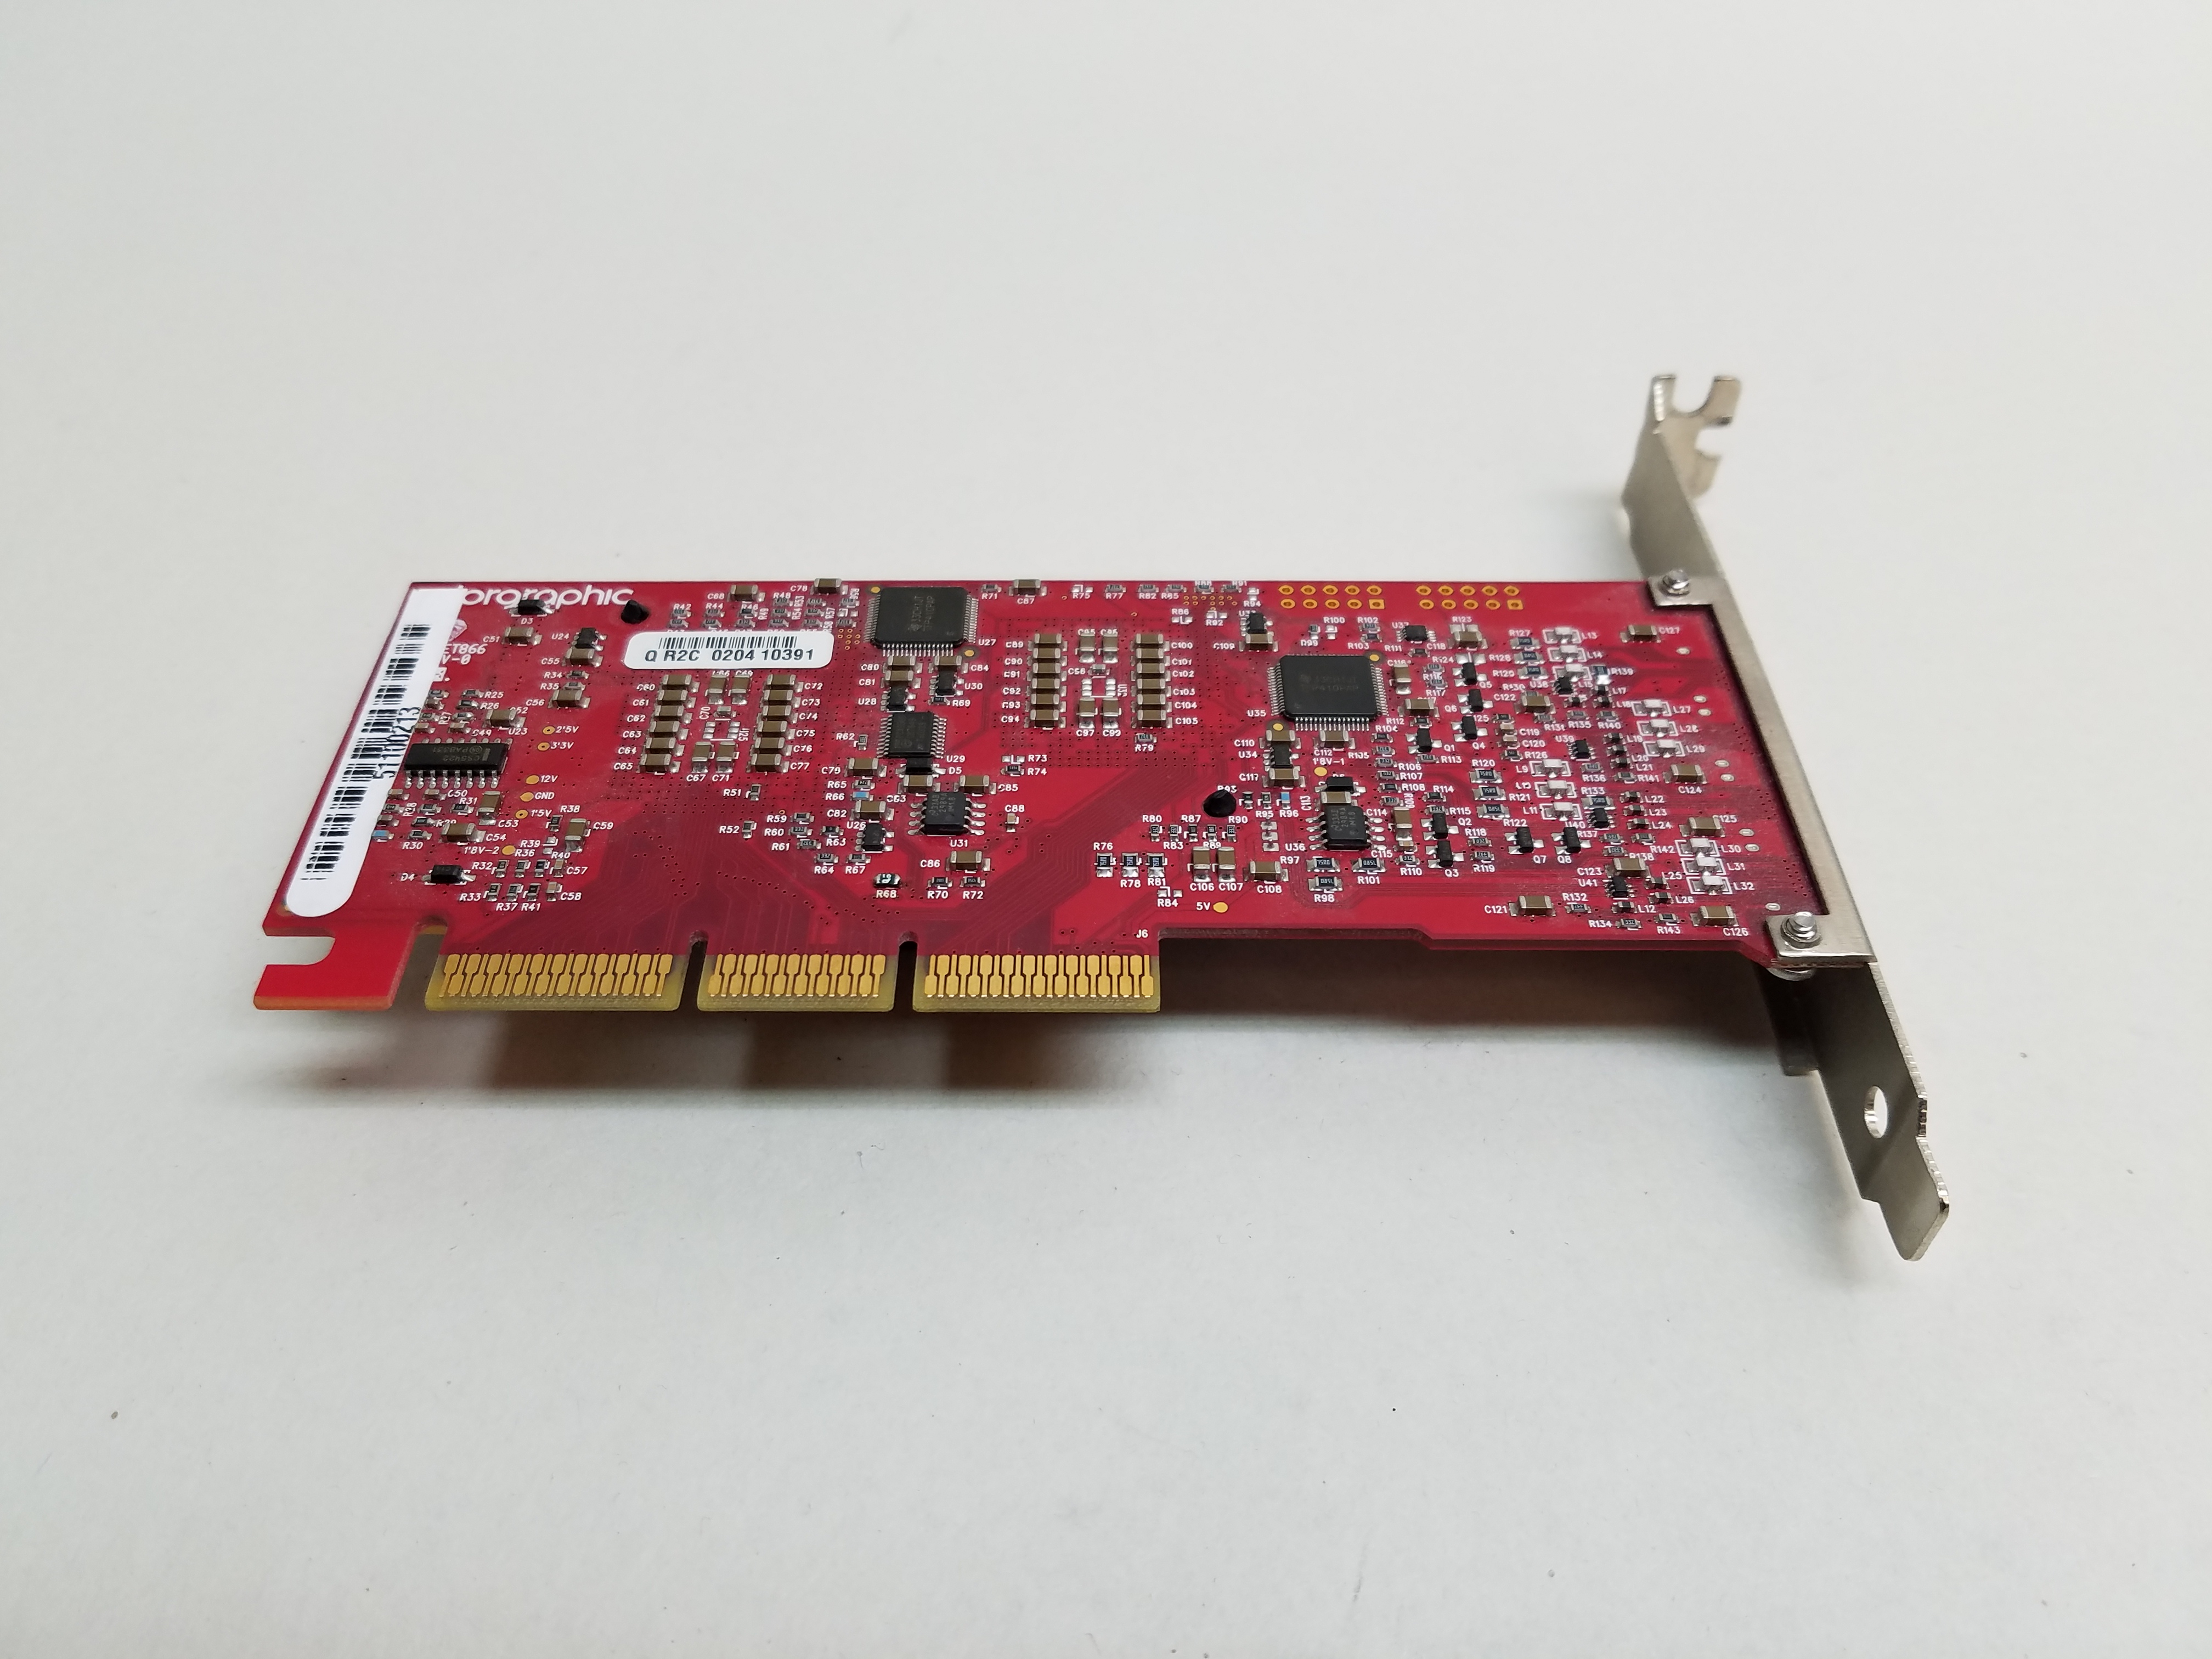 Pre-Owned Colorgraphic ATI Radeon 9000 128MB DDR1 AGP Desktop Video Card (Good) - image 3 of 3